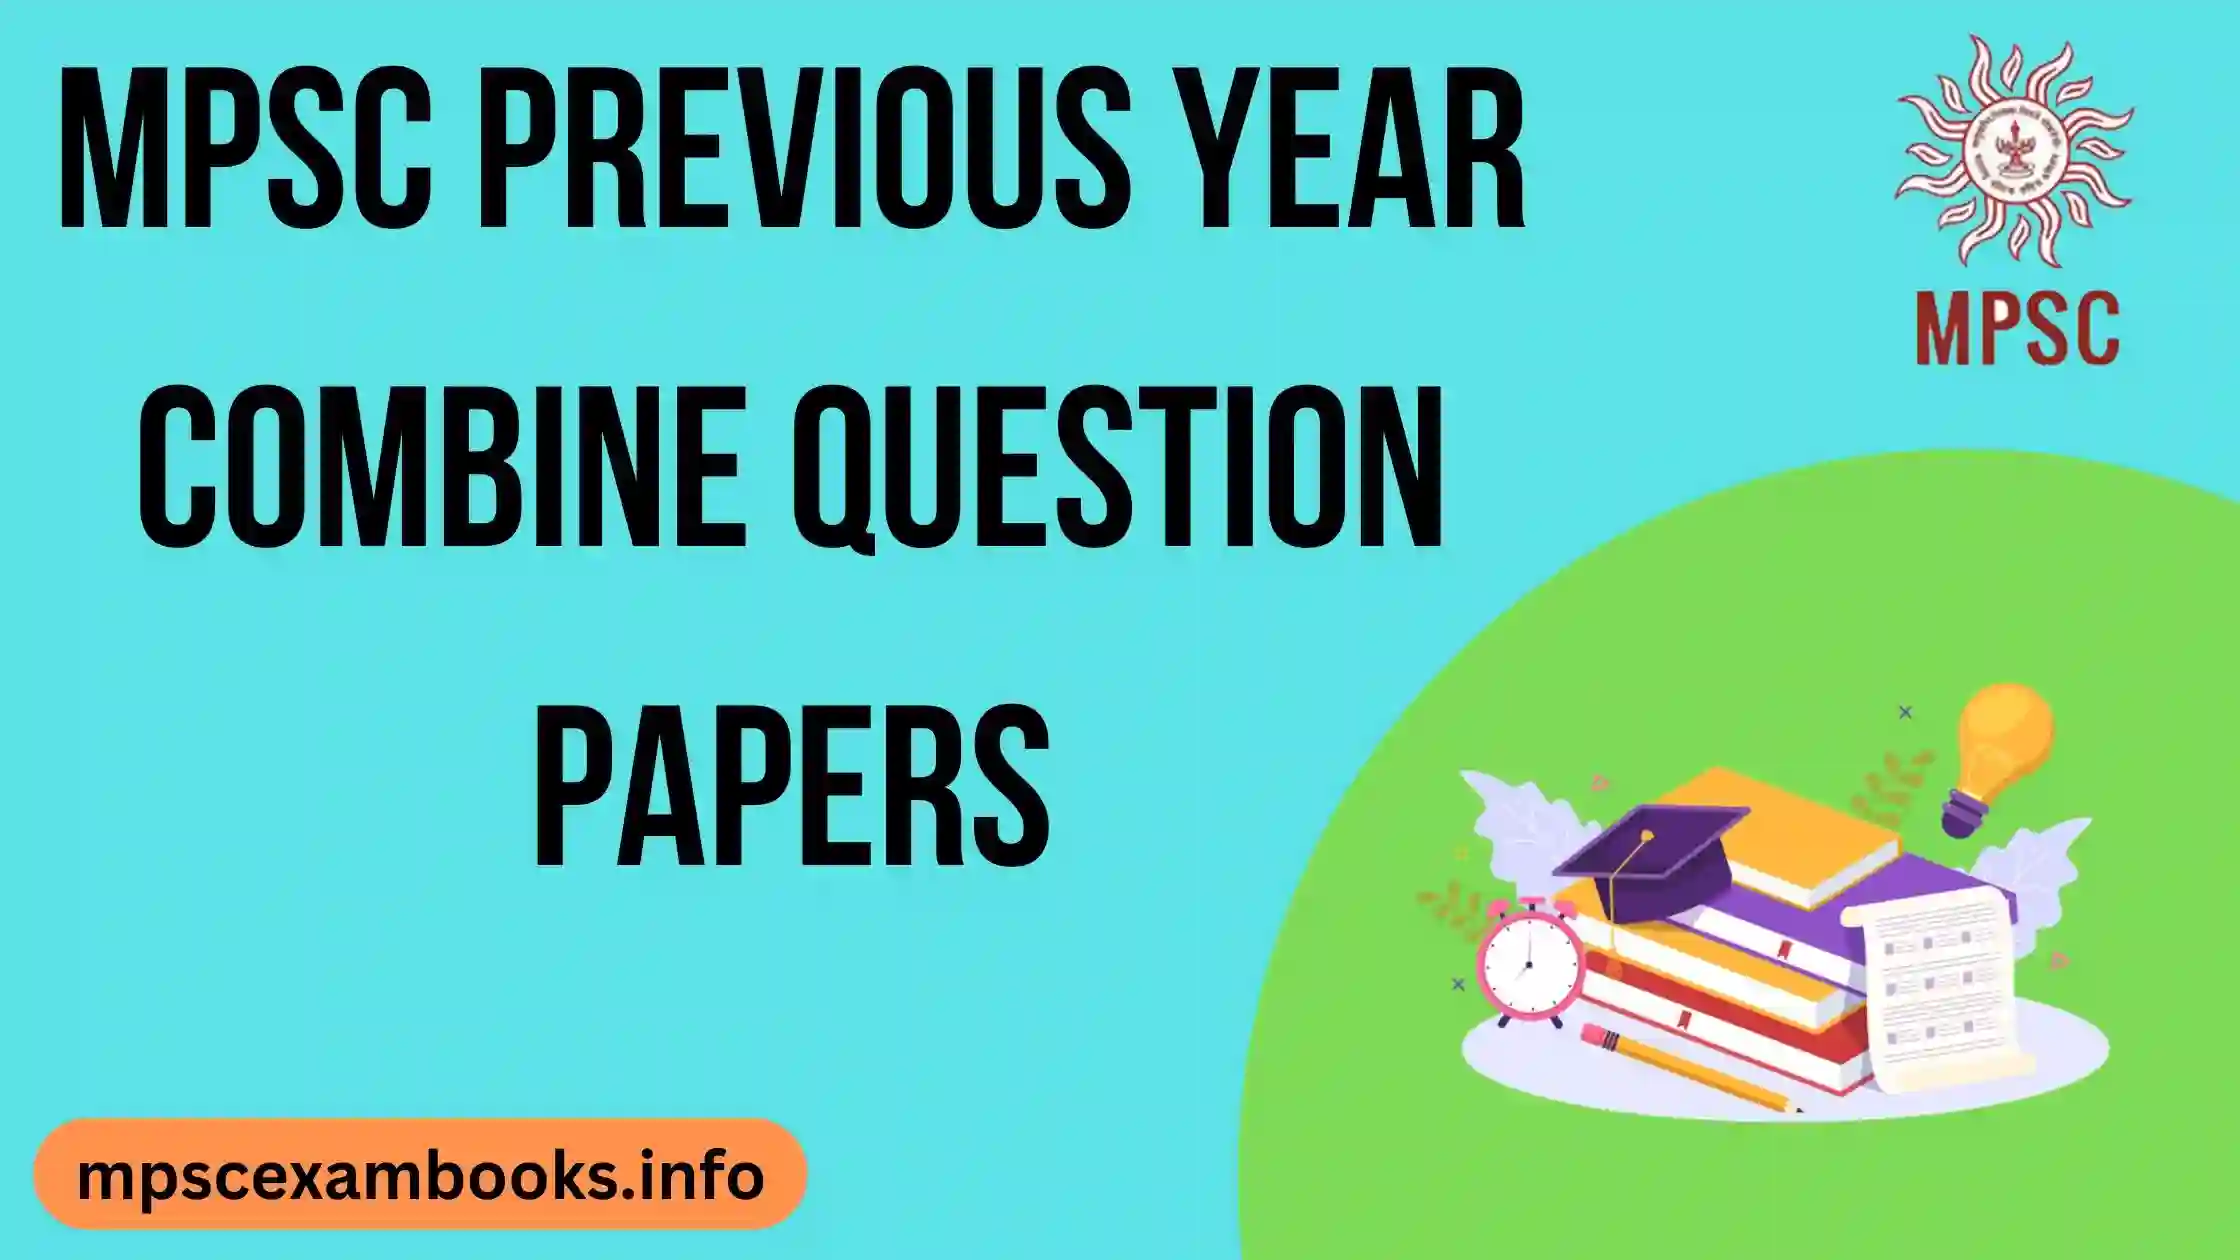 MPSC Previous Year combine question papers